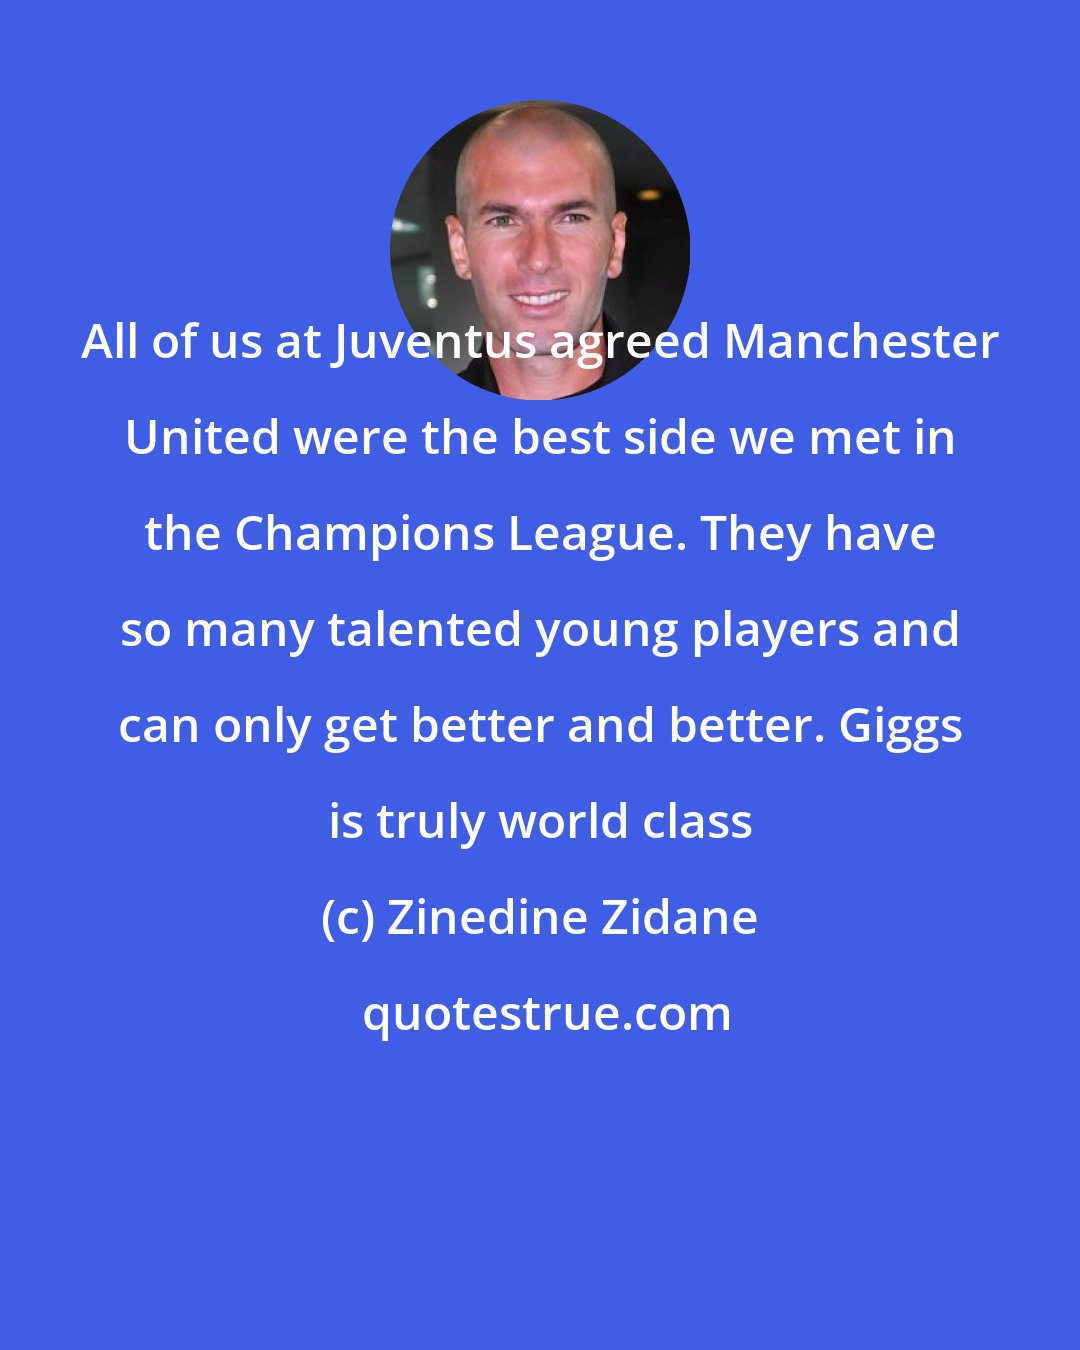 Zinedine Zidane: All of us at Juventus agreed Manchester United were the best side we met in the Champions League. They have so many talented young players and can only get better and better. Giggs is truly world class